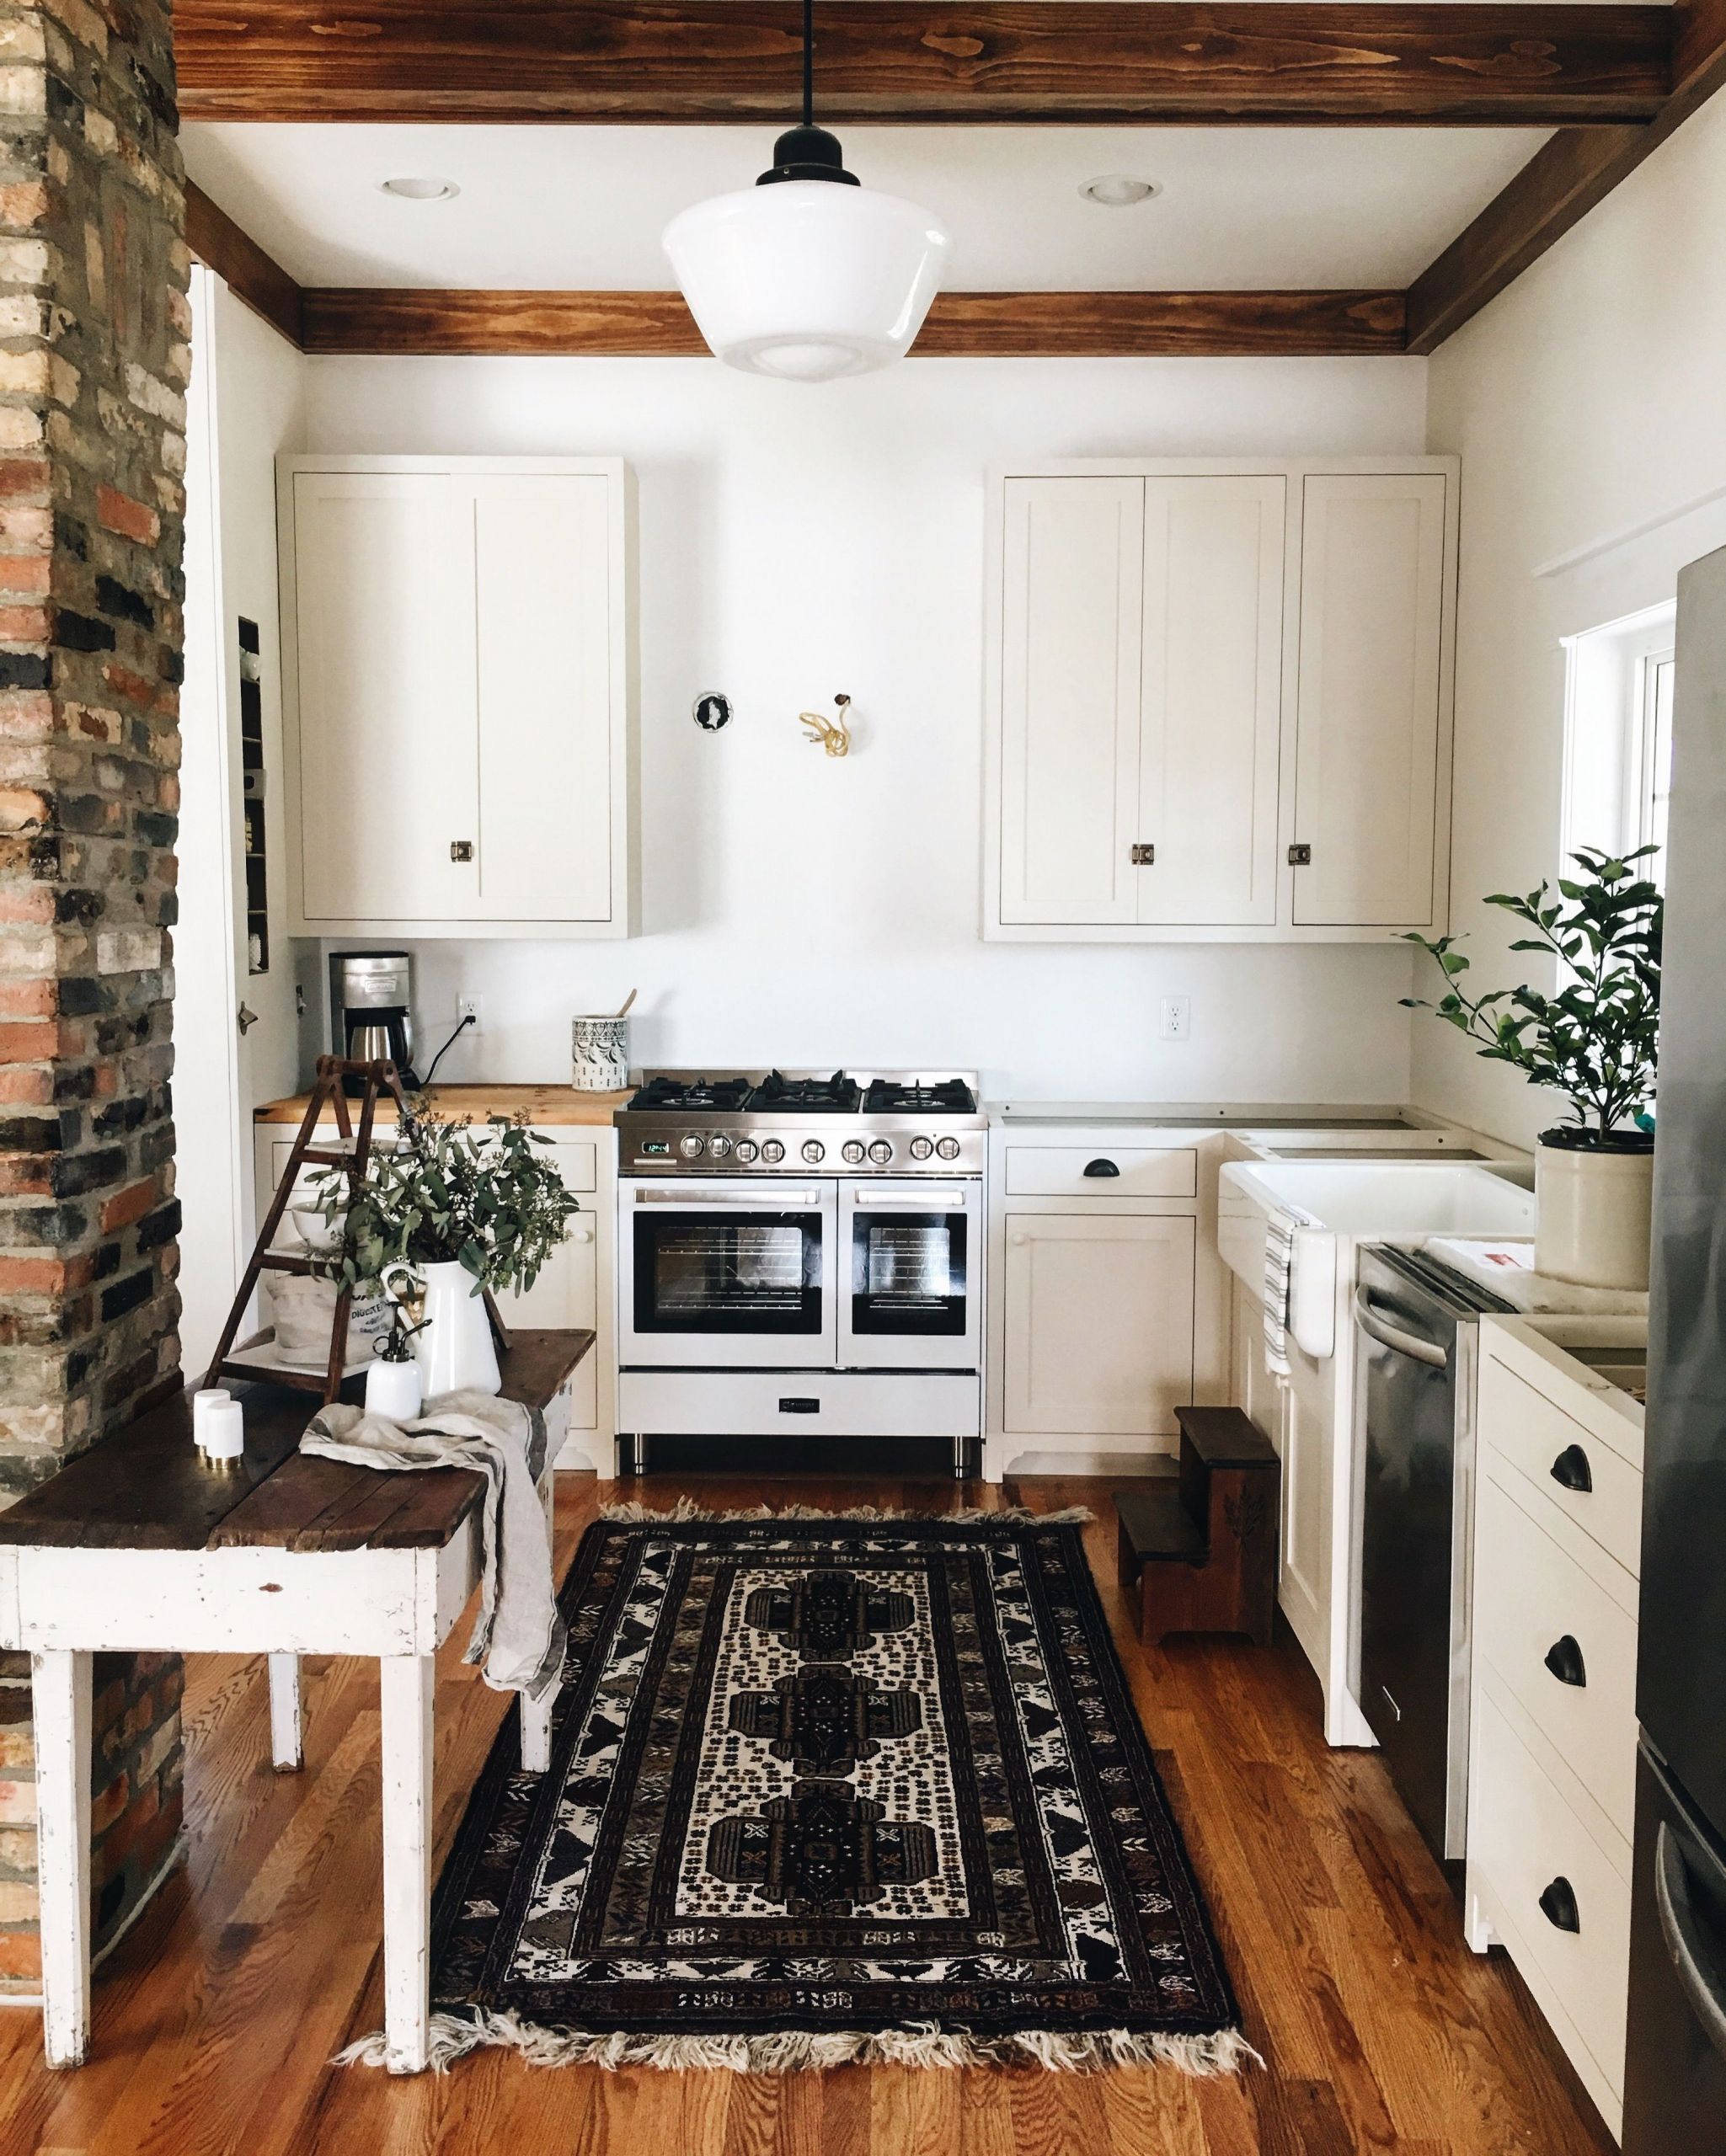 White Kitchen Rugs
 Warm kitchen with wood flooring wood beams and white